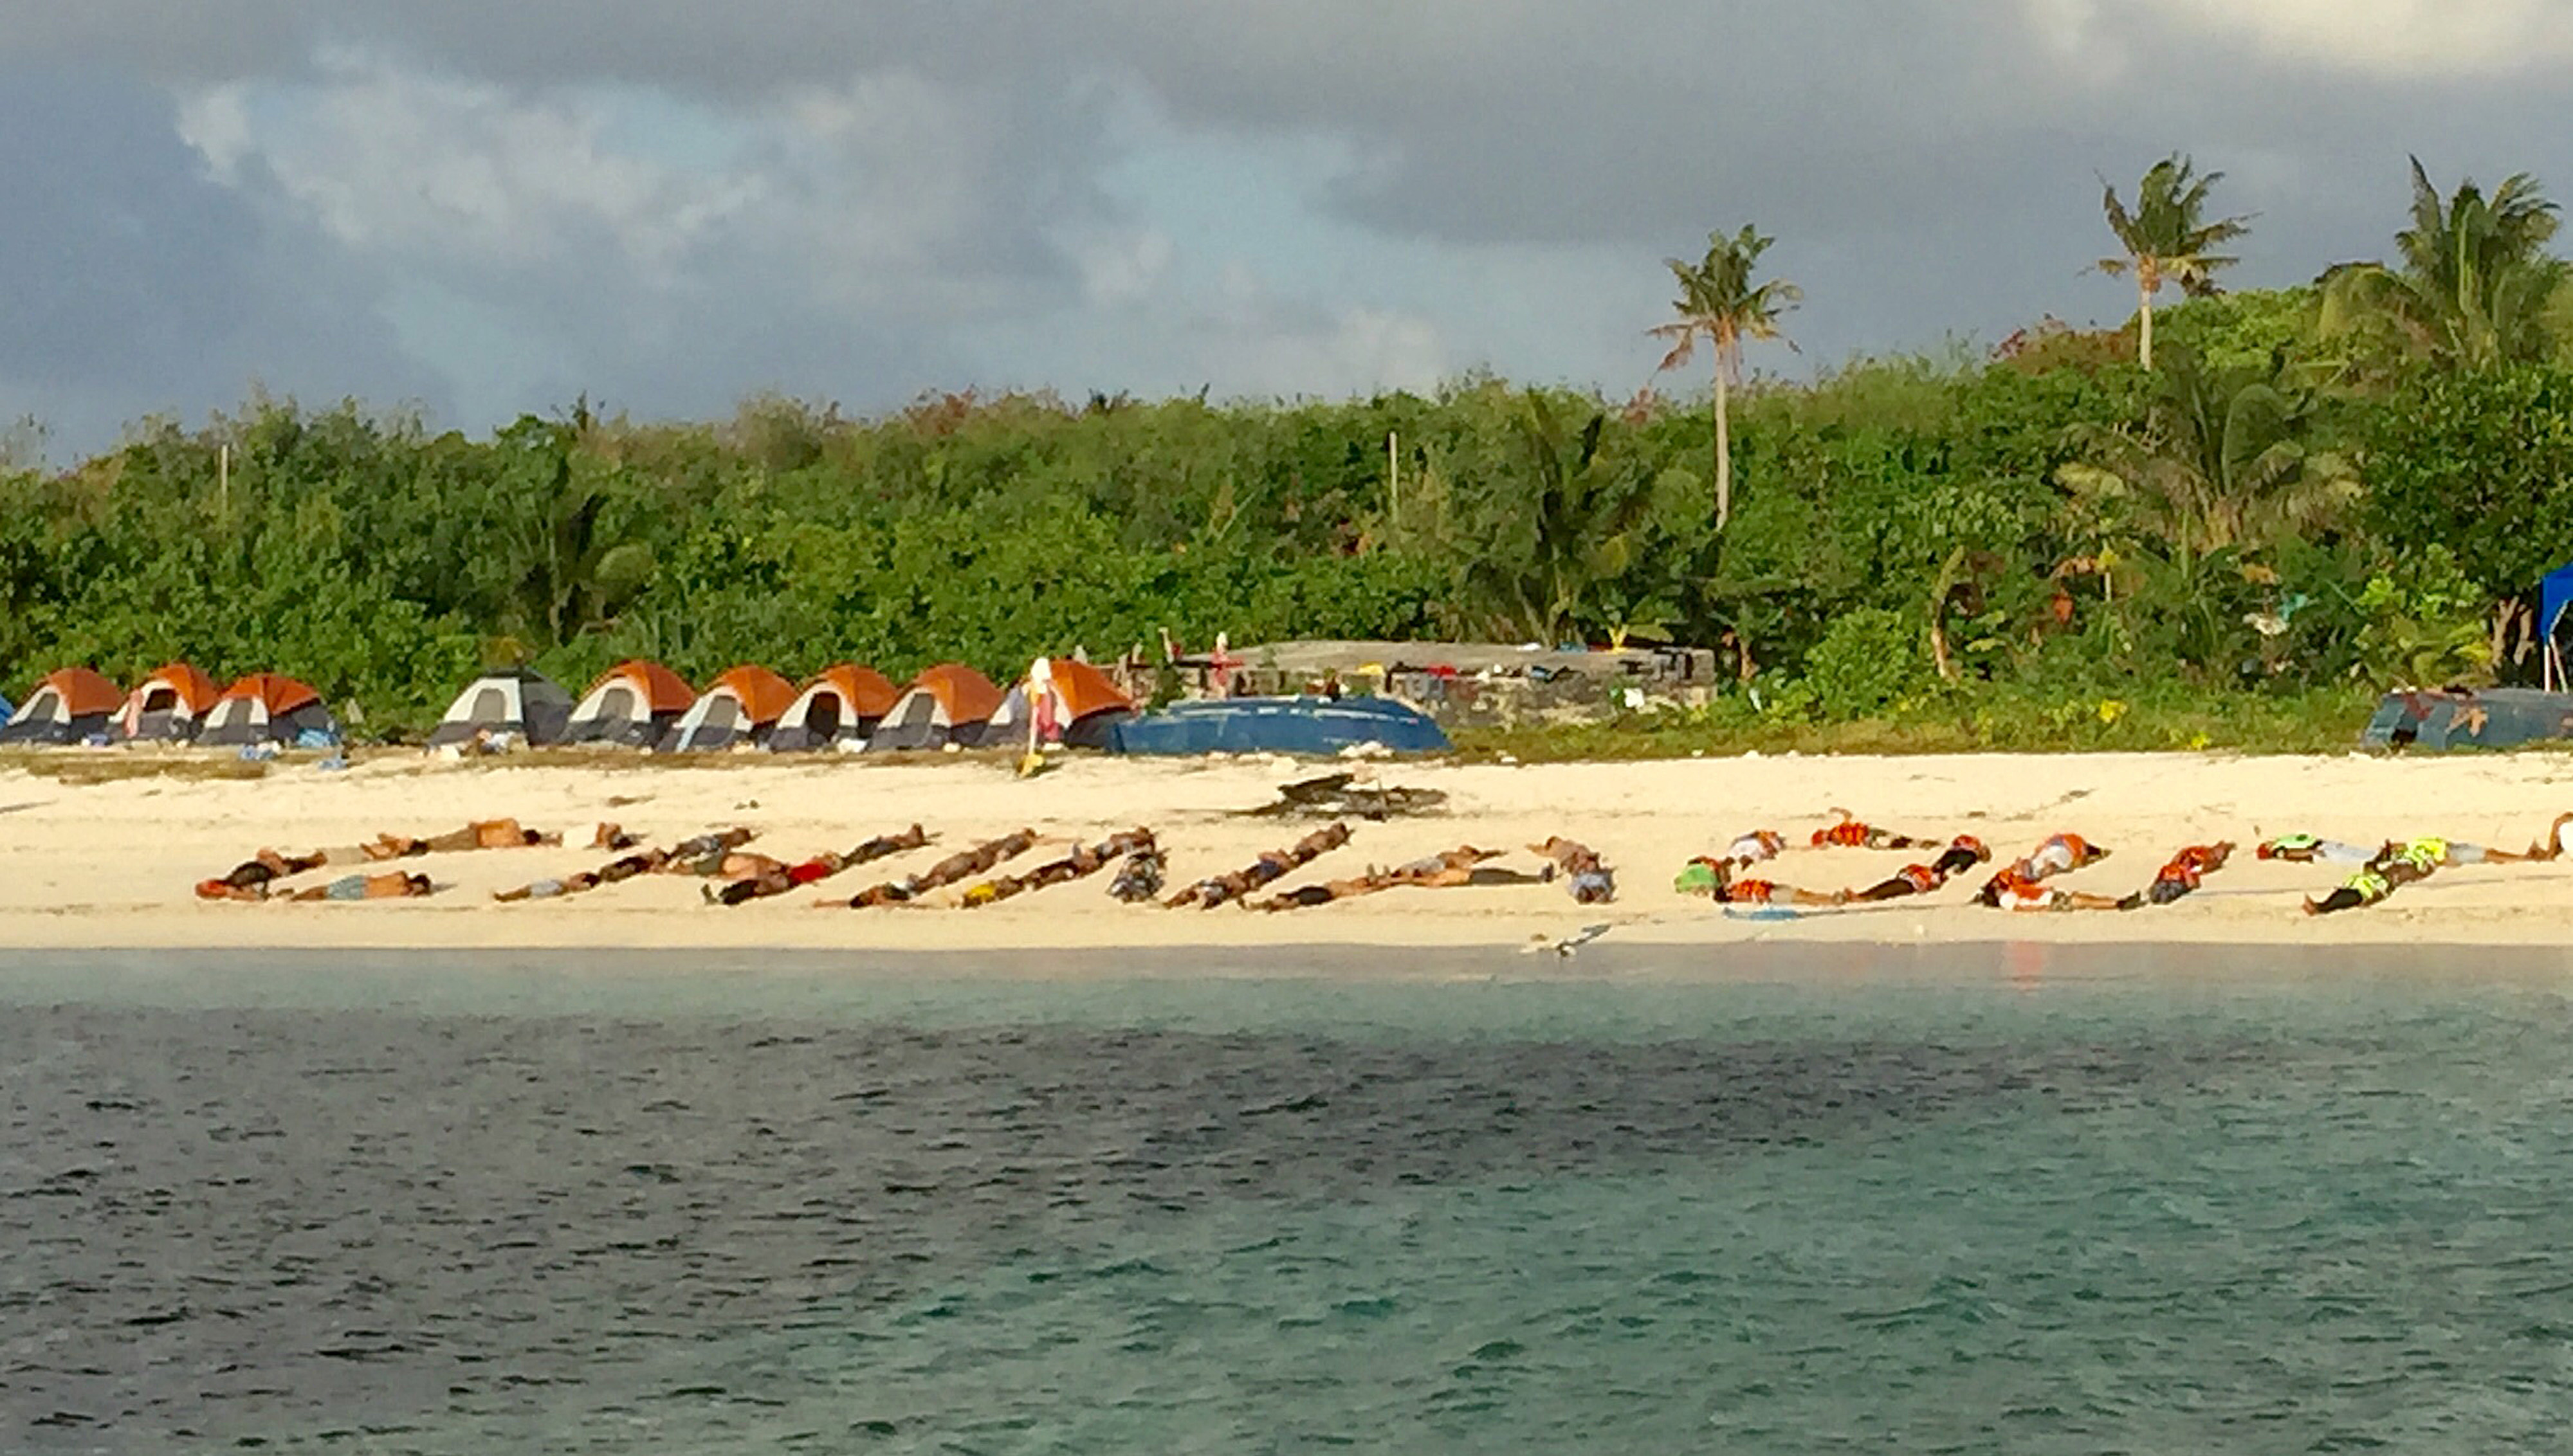 This photo taken on December 31, 2015, shows Filipino children forming a sign 'China Out' during a protest on a beach at Pag-asa island, a remote Philippine-held island in the South China Sea. in the South China Sea claimed by the Philippines. Nearly 50 young Filipinos returned on January 3, 2016 from a remote Philippine-held island in the South China Sea where they had staged a week-long protest against Beijing's claims in the disputed waterway. The group arrived at Pag-asa island on December 26 as part of an effort to stir up popular opposition to China's claim to most of the contested sea, including Pag-asa, also known as Thitu. AFP PHOTO / AFP PHOTO / AFP